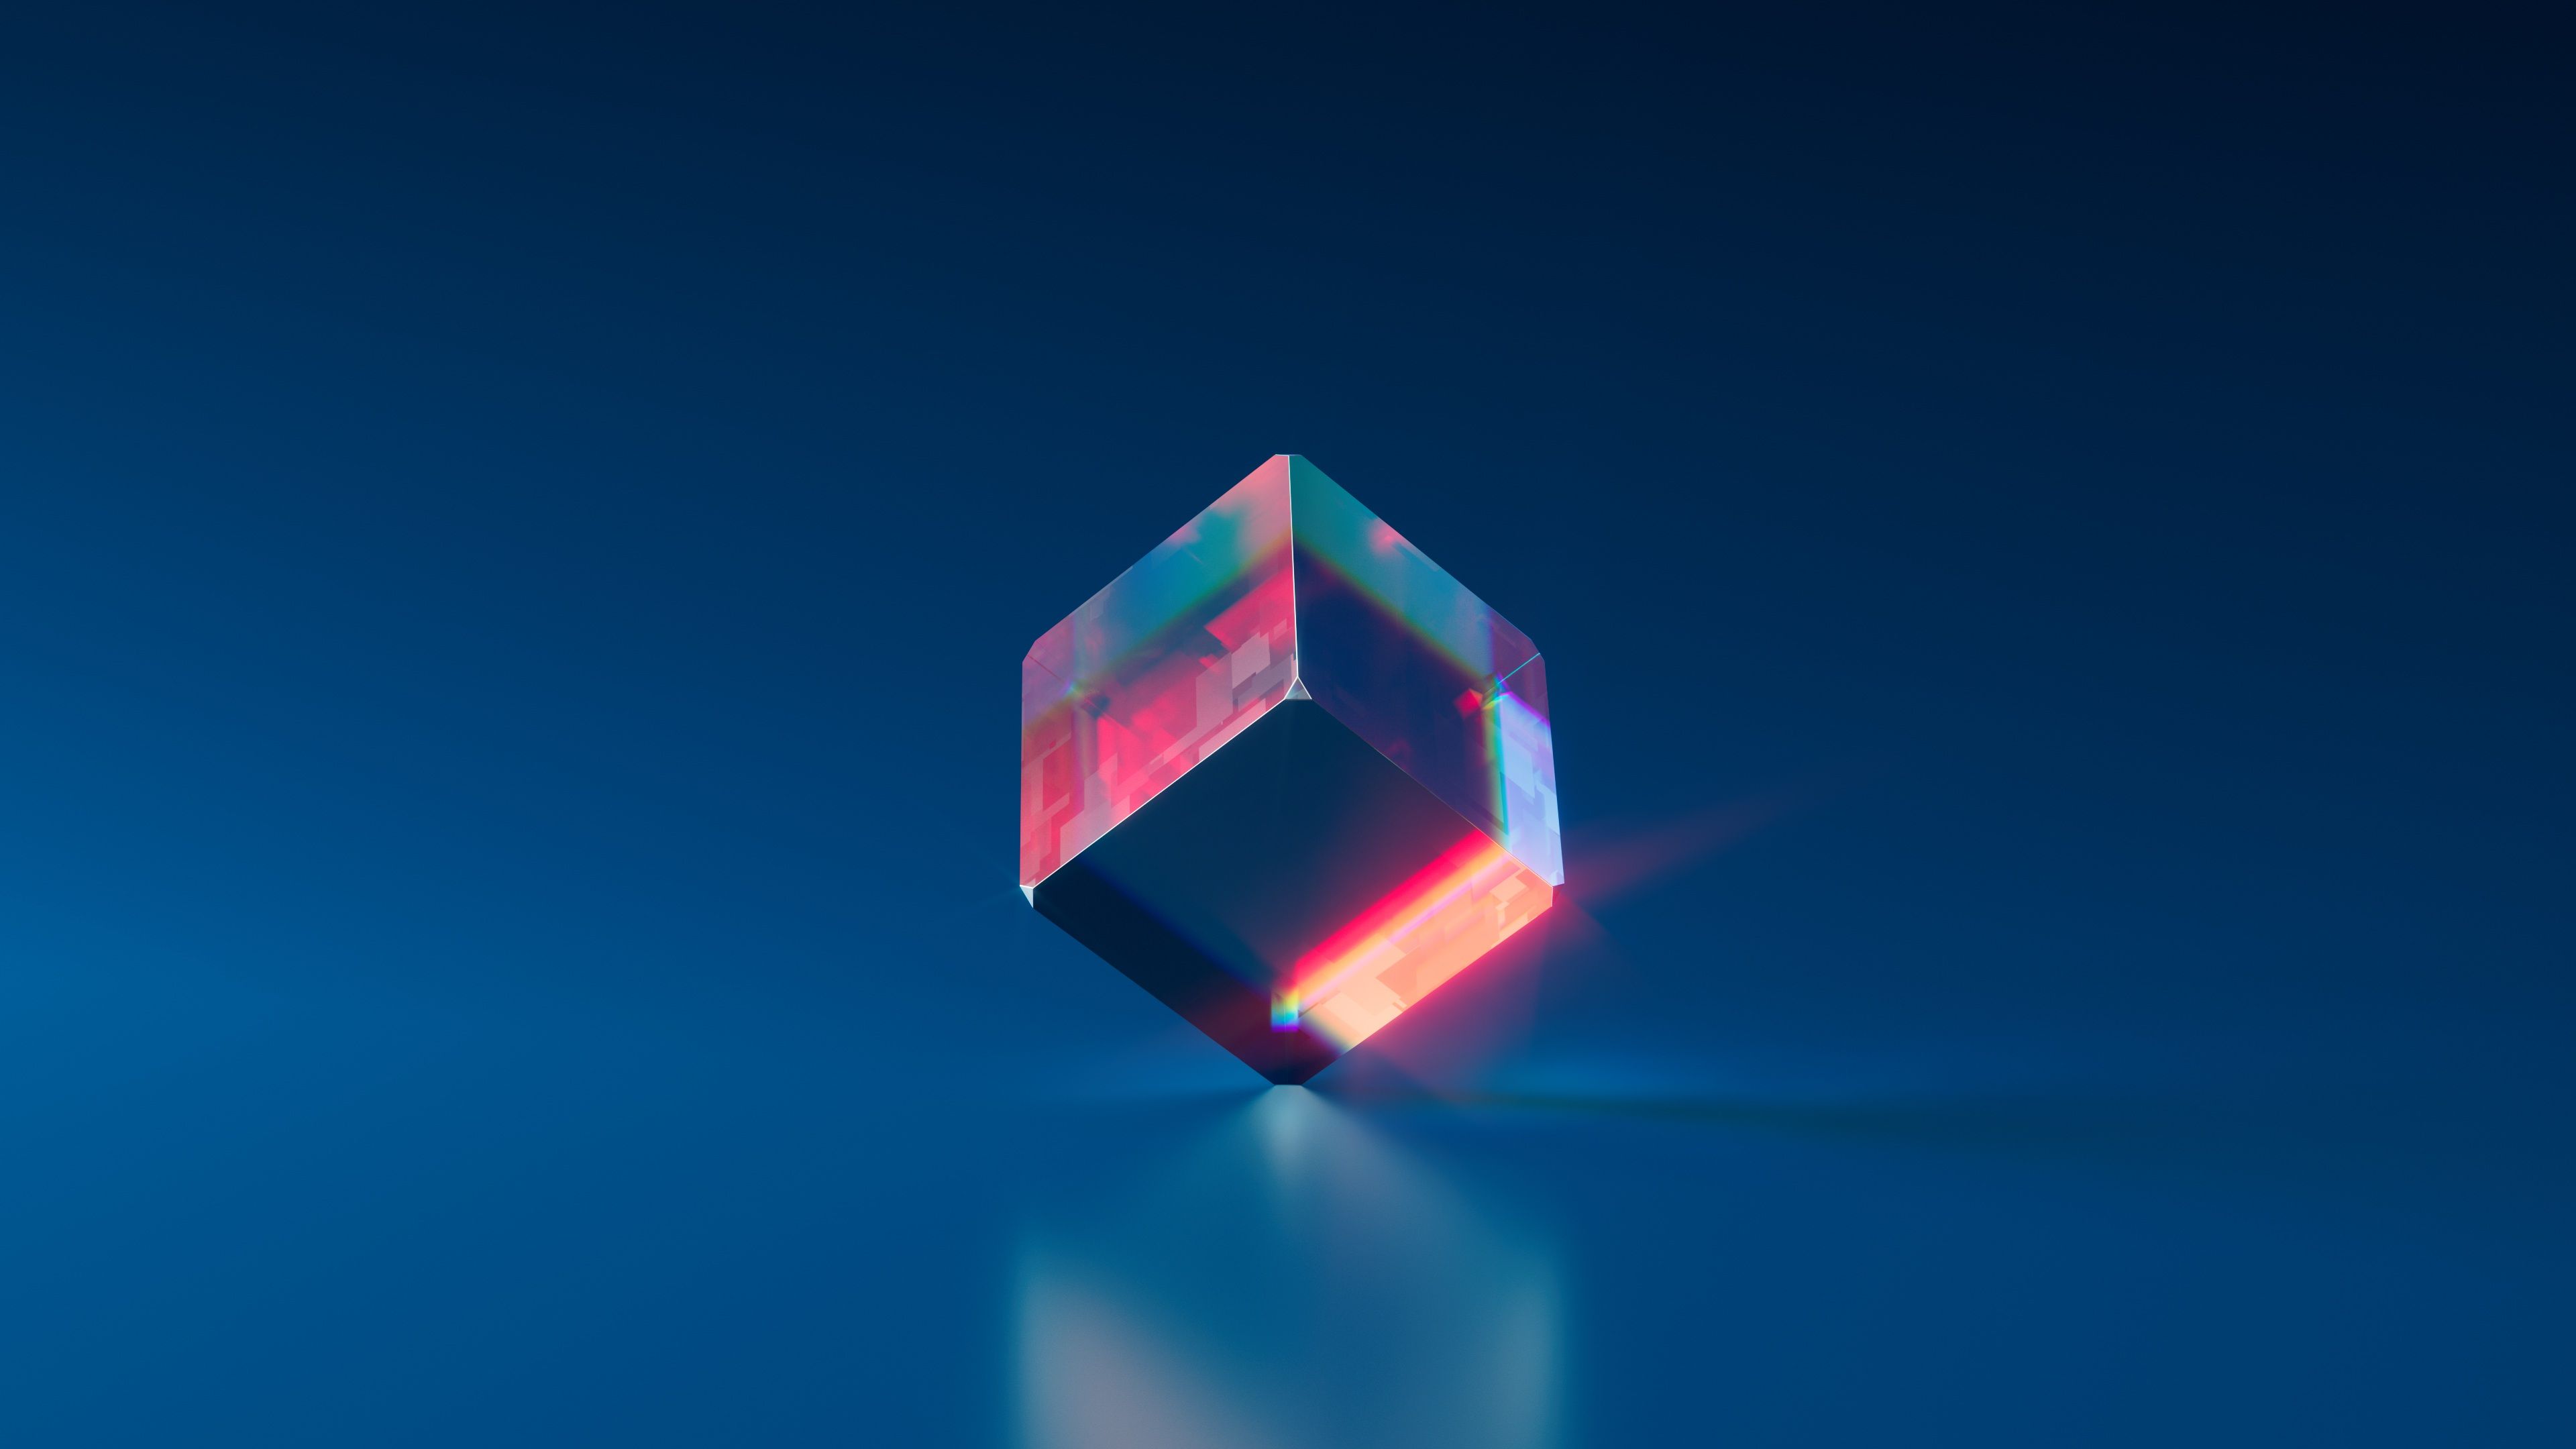 Crystal 4K wallpapers for your desktop or mobile screen free and easy to download